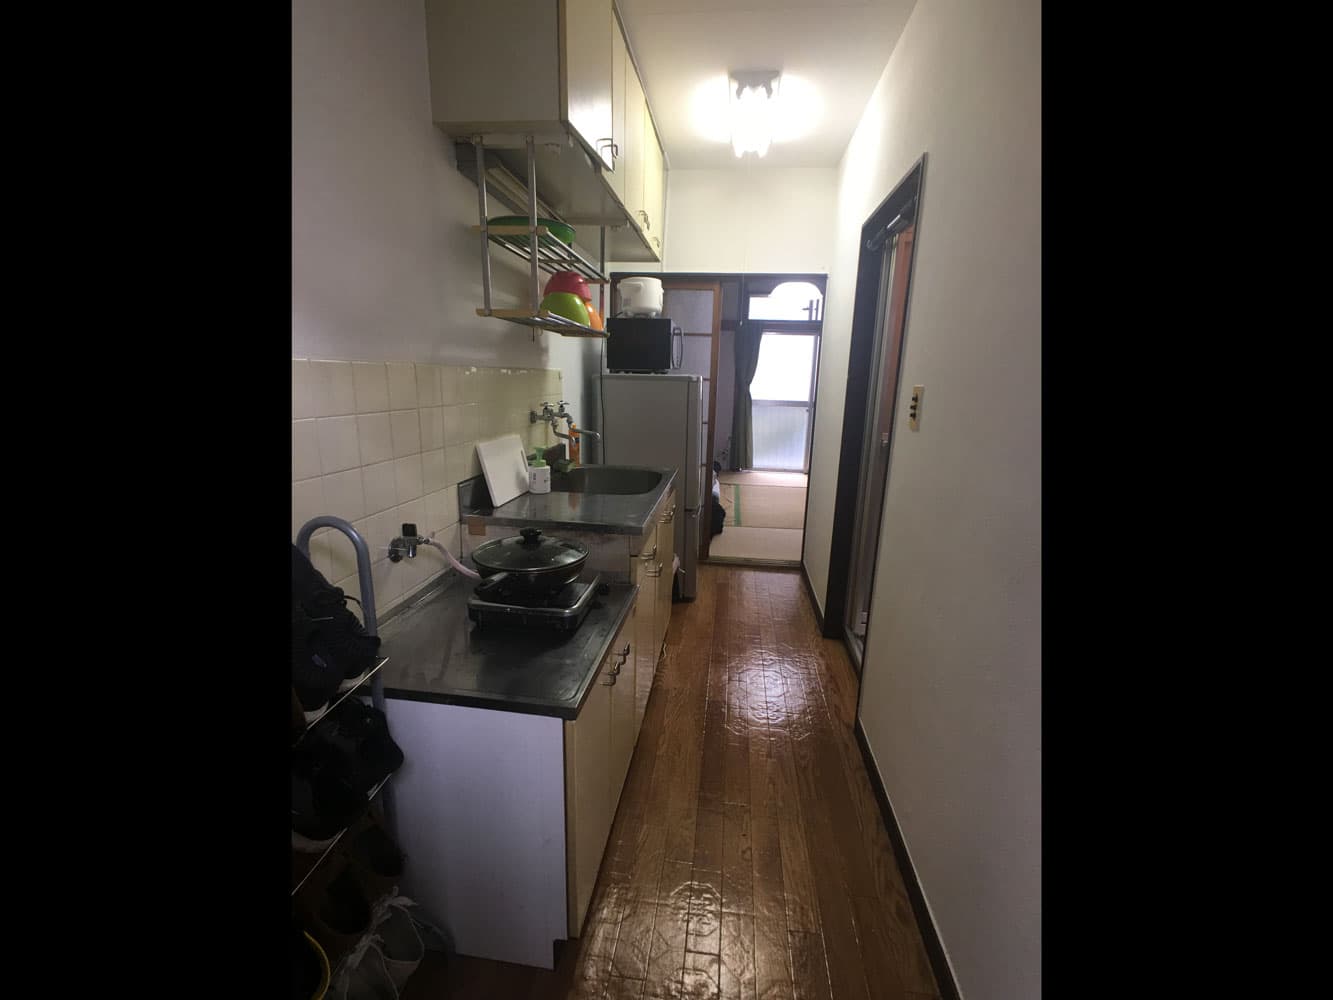 The cozy kitchen in this 1K apartment, with a stove, microwave, refrigerator, rice cooker, and more.